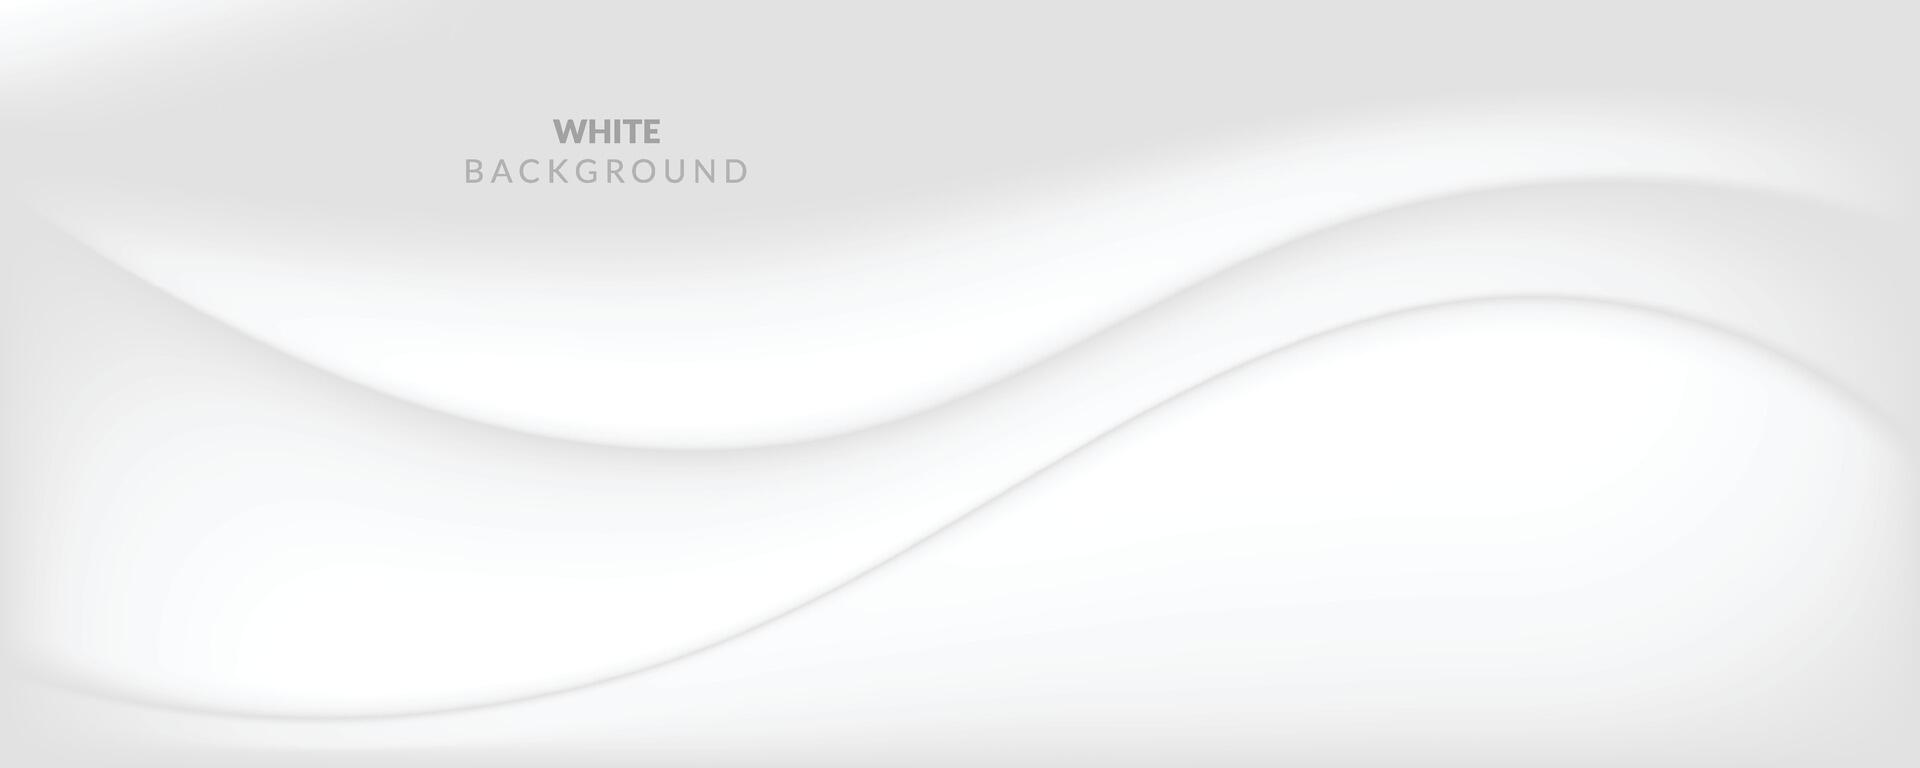 White geometric abstract background with waves effect. Minimal modern graphic design element cutout style concept for banner, flyer, card, or brochure cover vector